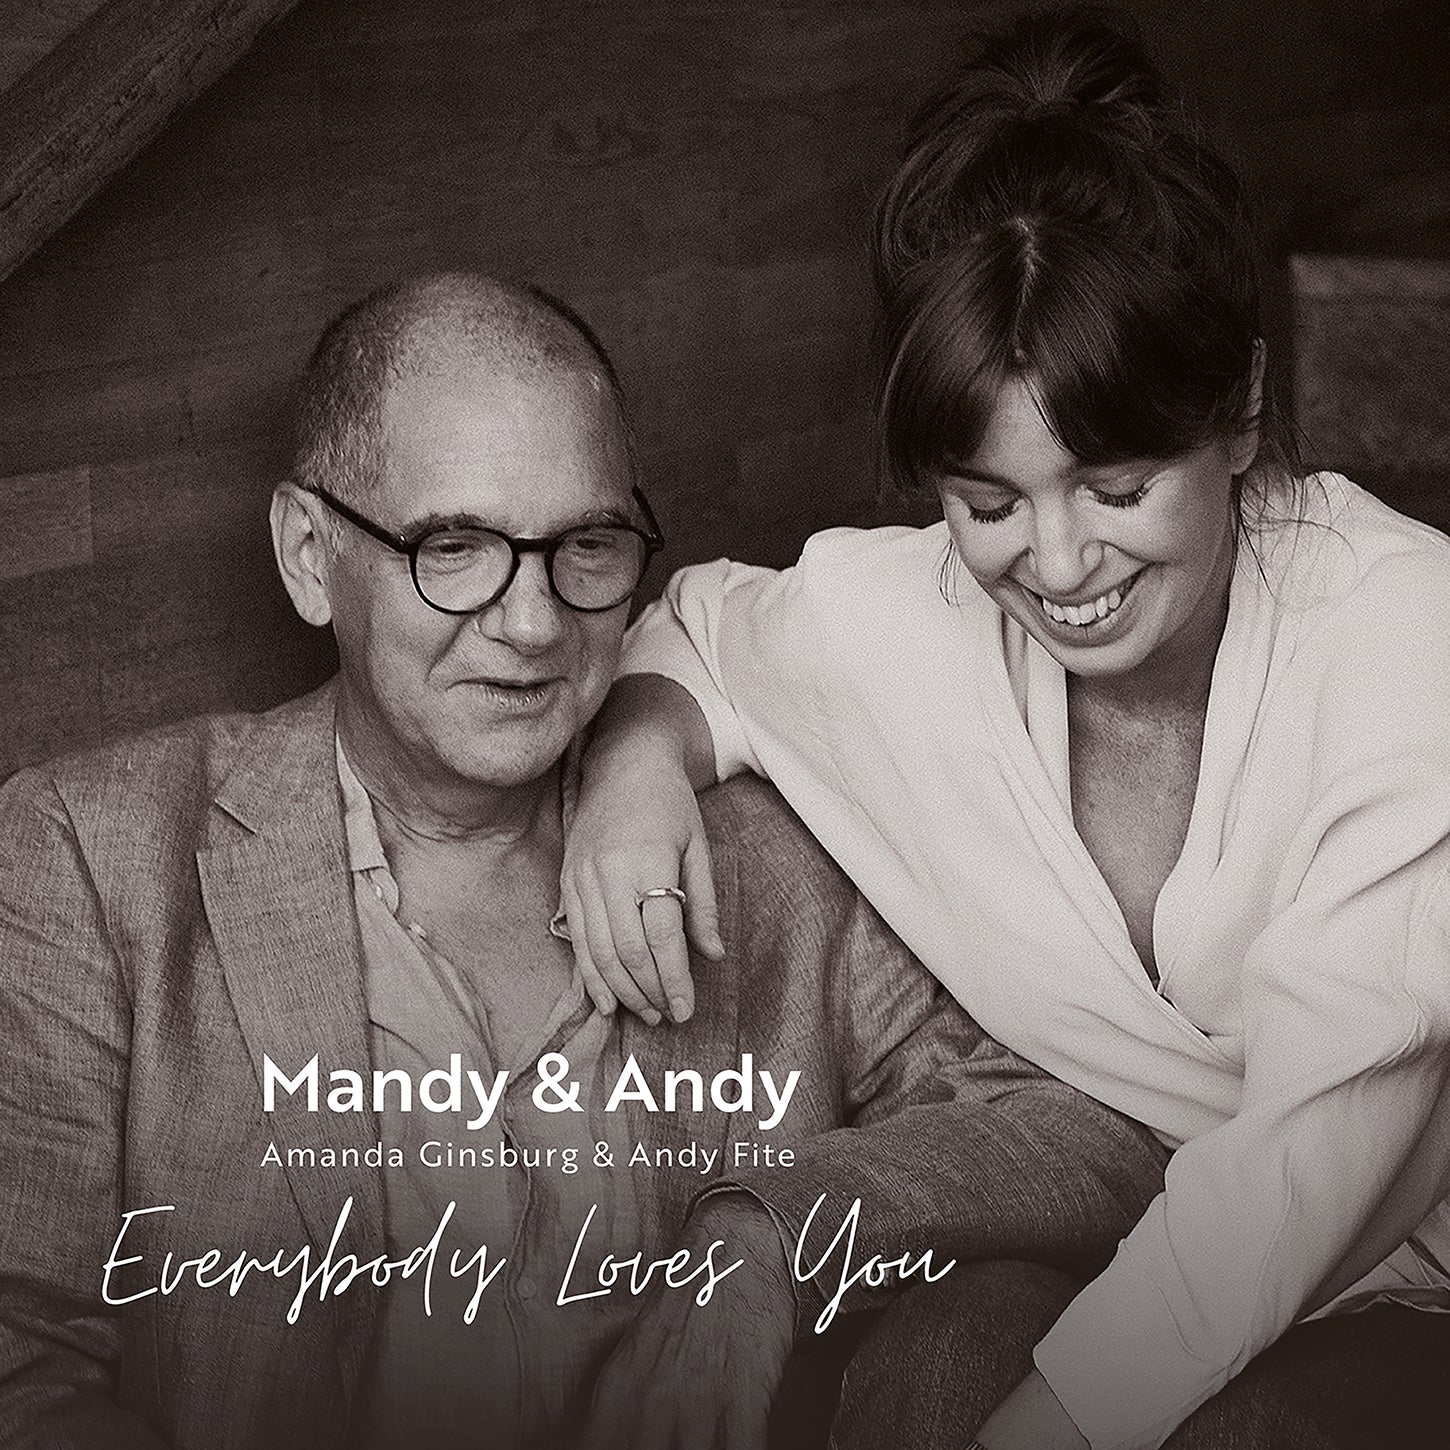 Mandy & Andy - Everybody Loves You / Andy Fite & Amanda Ginsburg